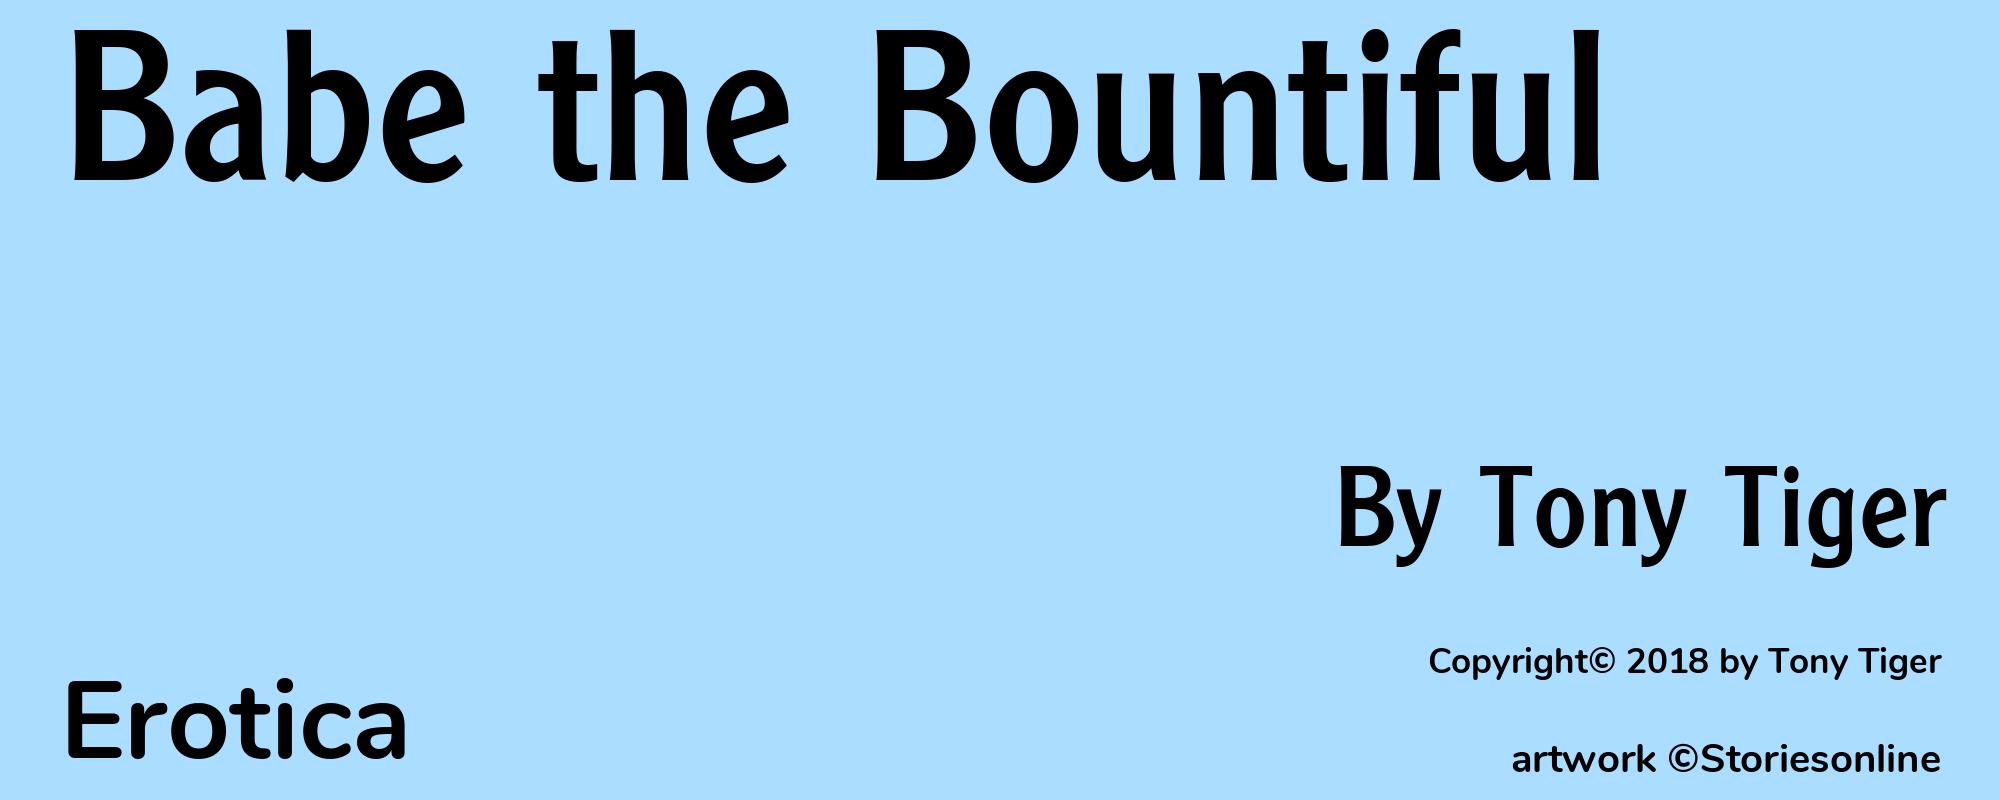 Babe the Bountiful - Cover